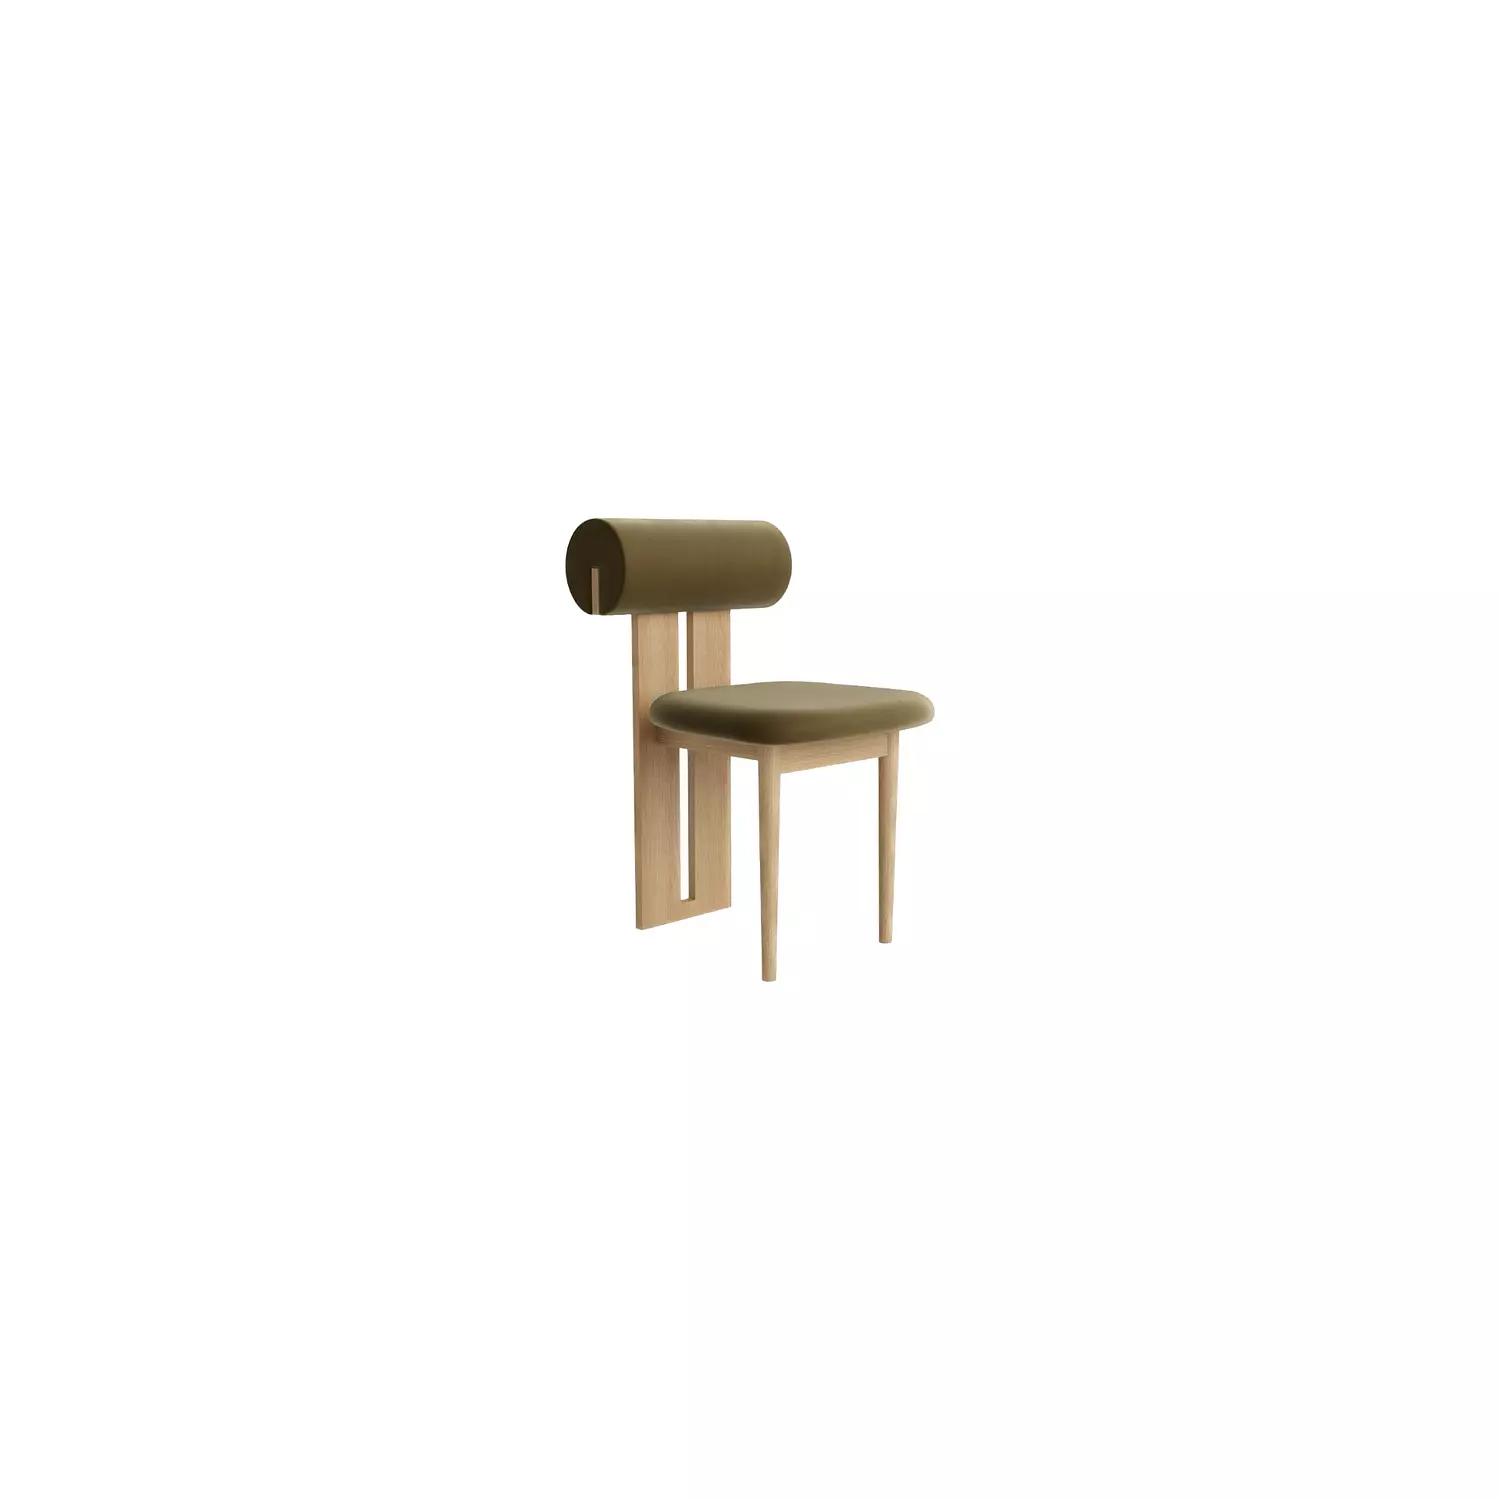 TOMMY HYLDAHL CHAIR hover image